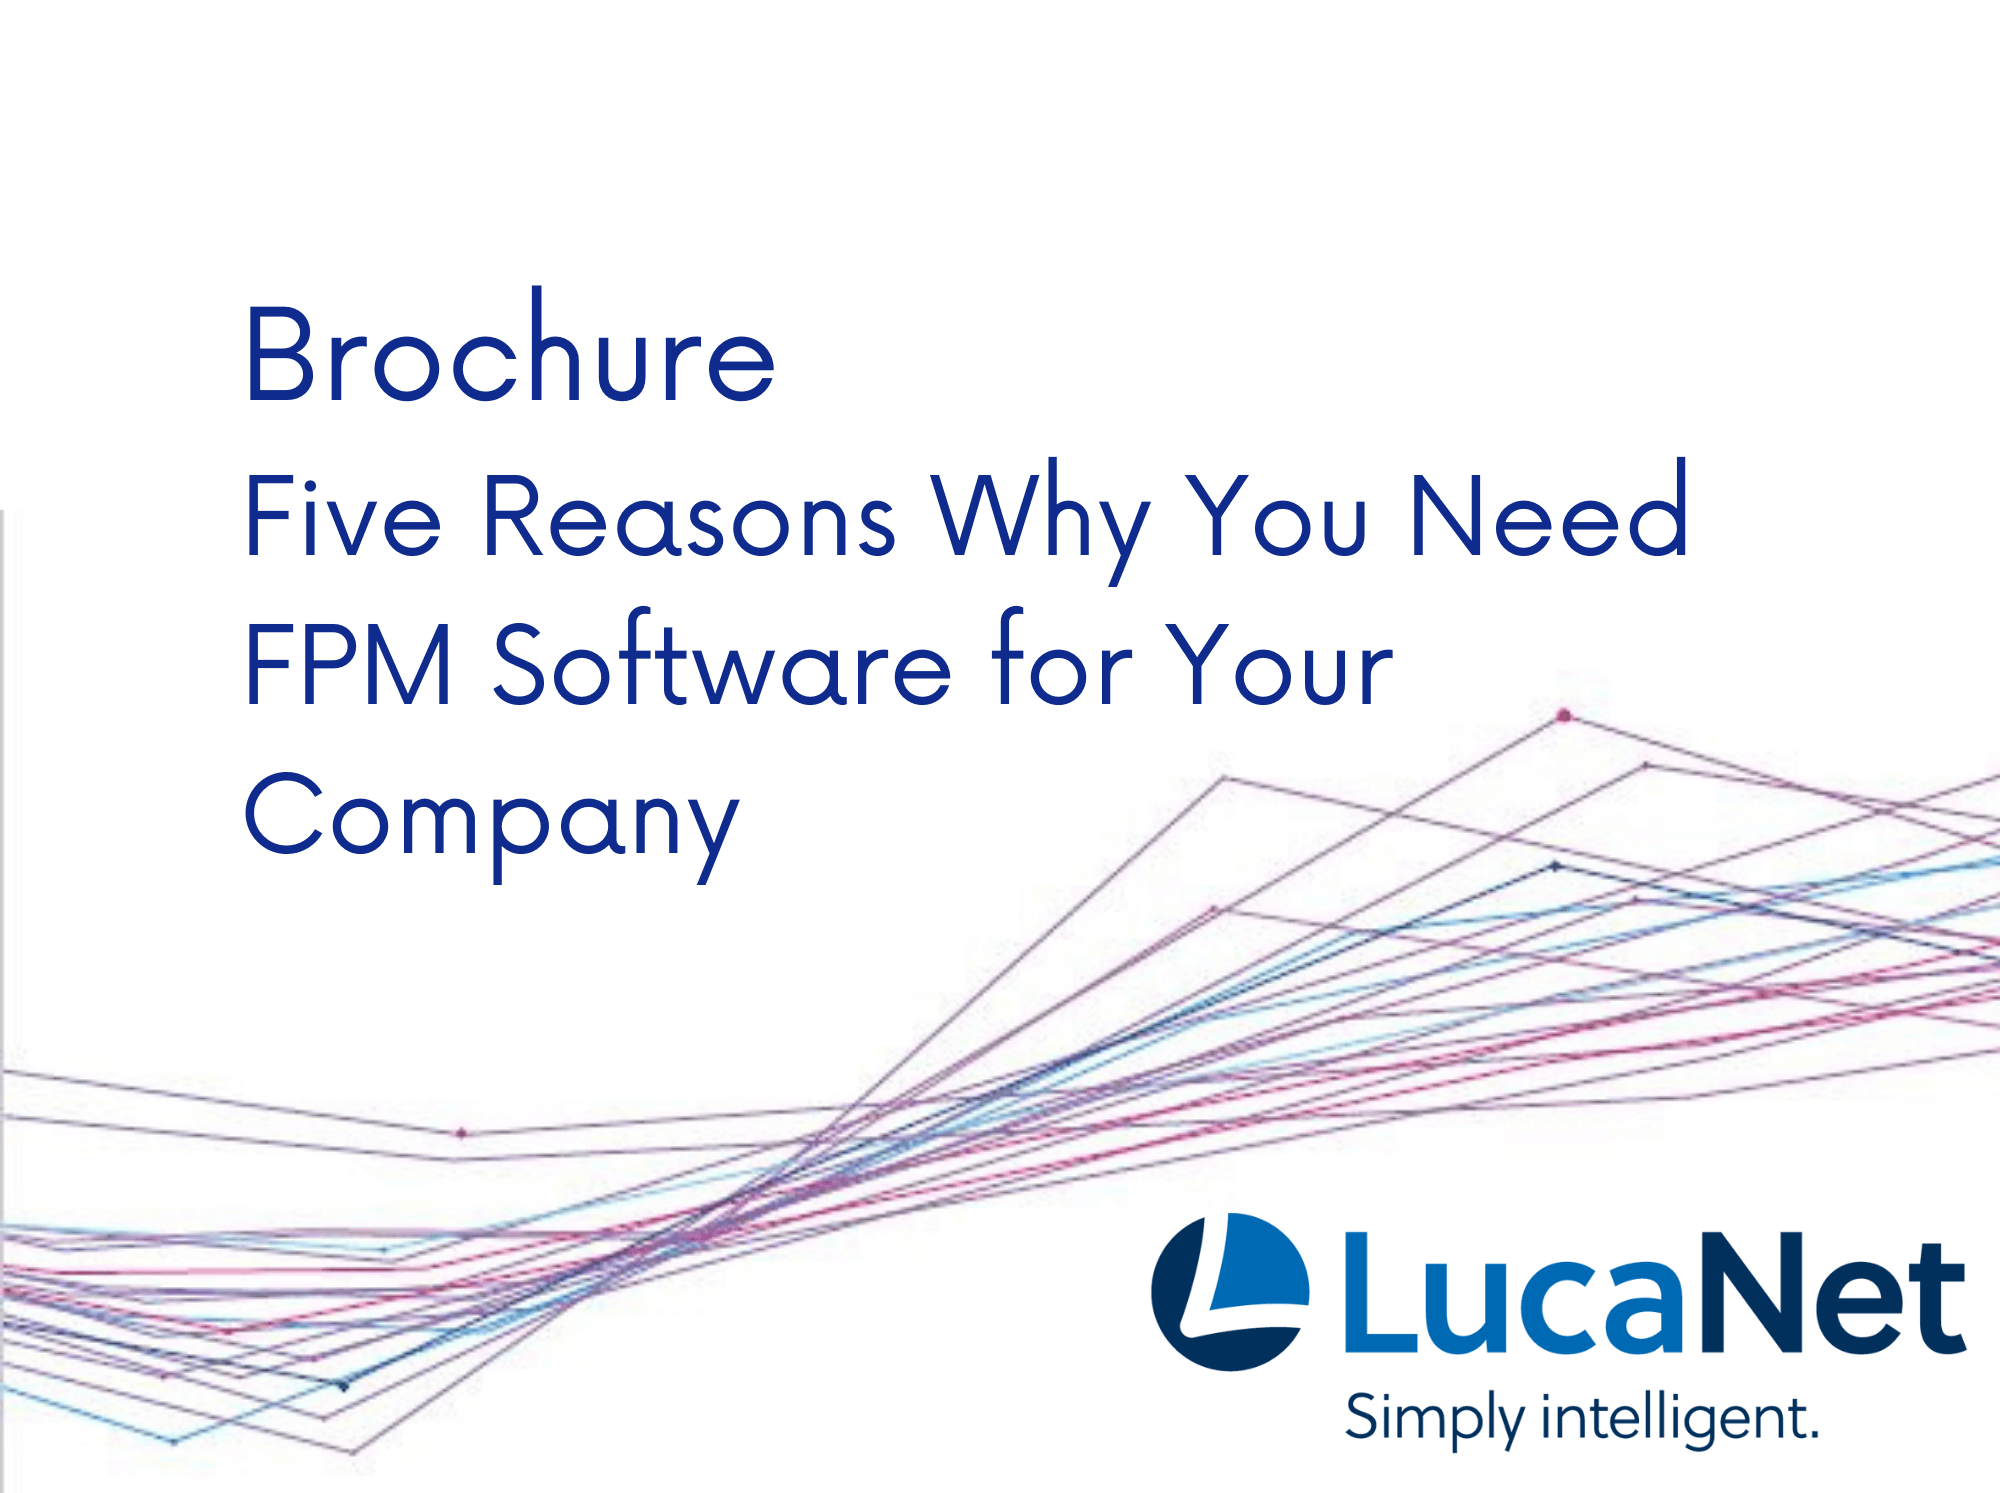 Lucanet - Five Reasons You Need FPM Software